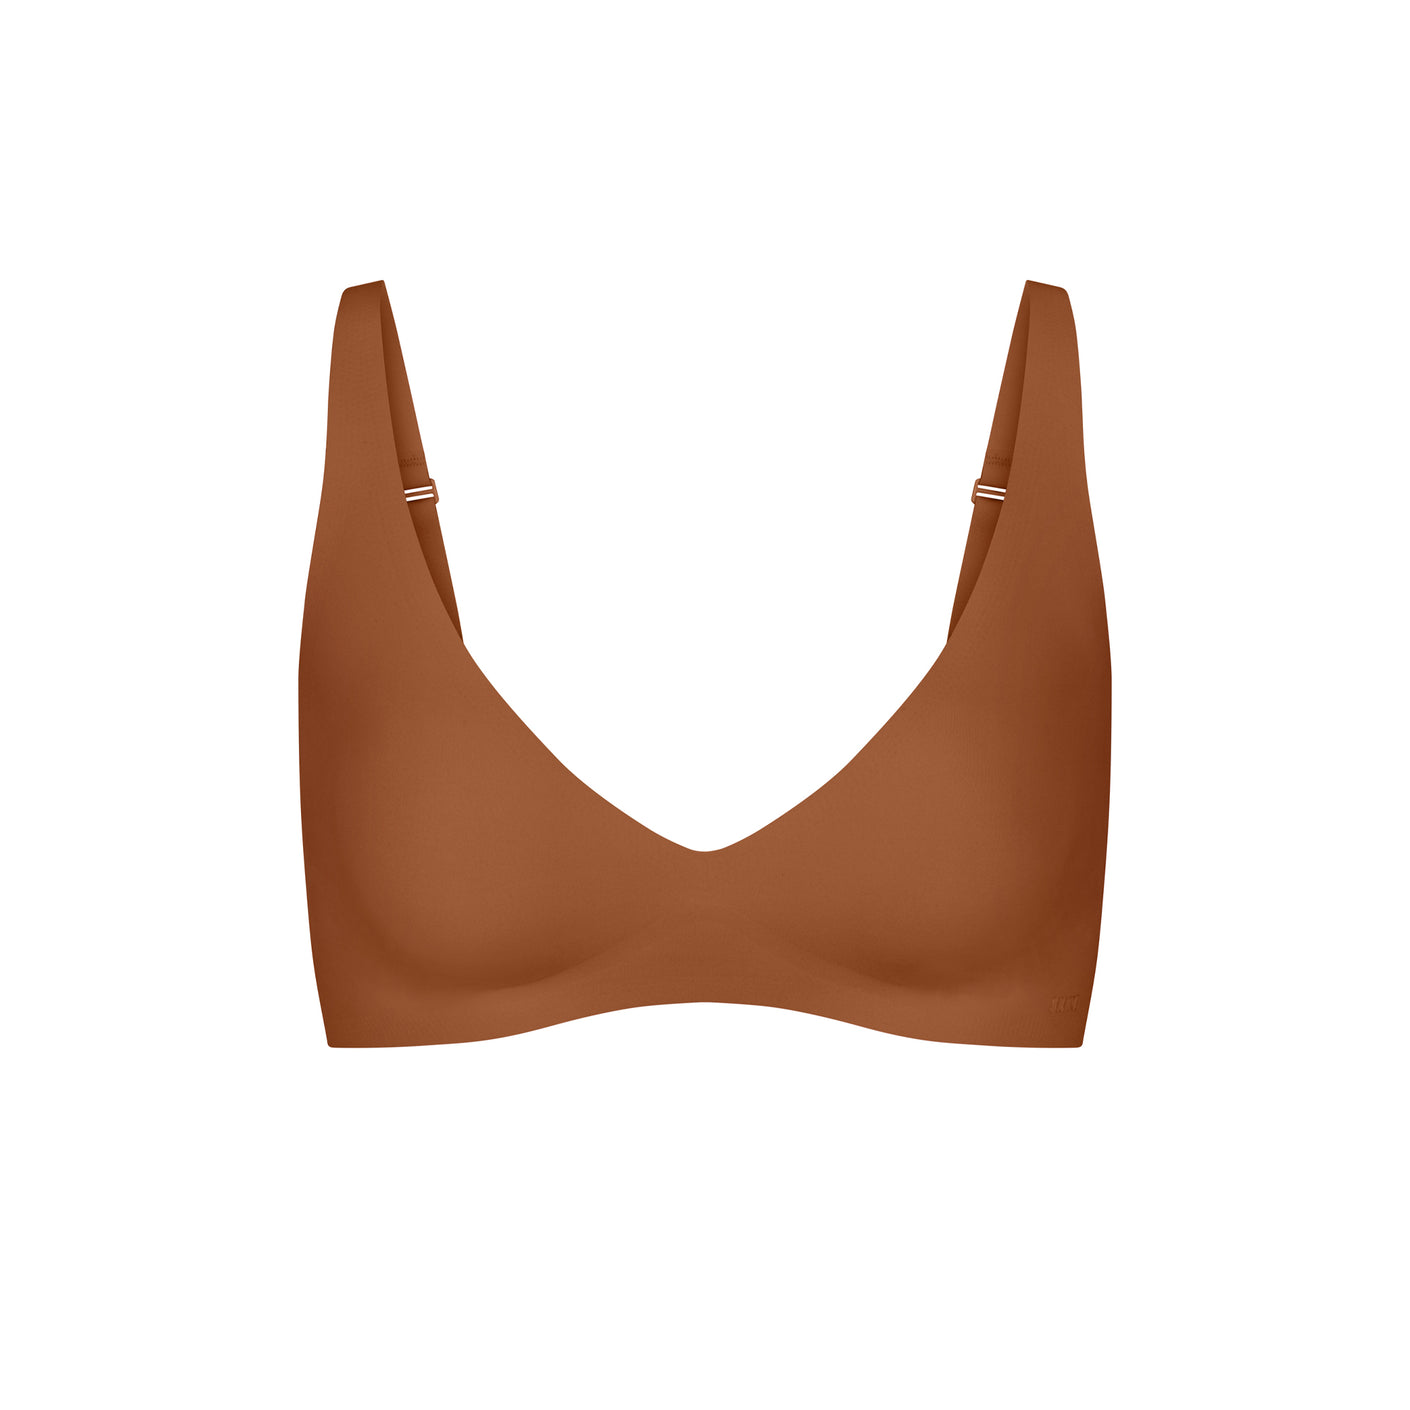 SKIMS Wireless Form Push Up Plunge Bra in Clay Size 32D Tan